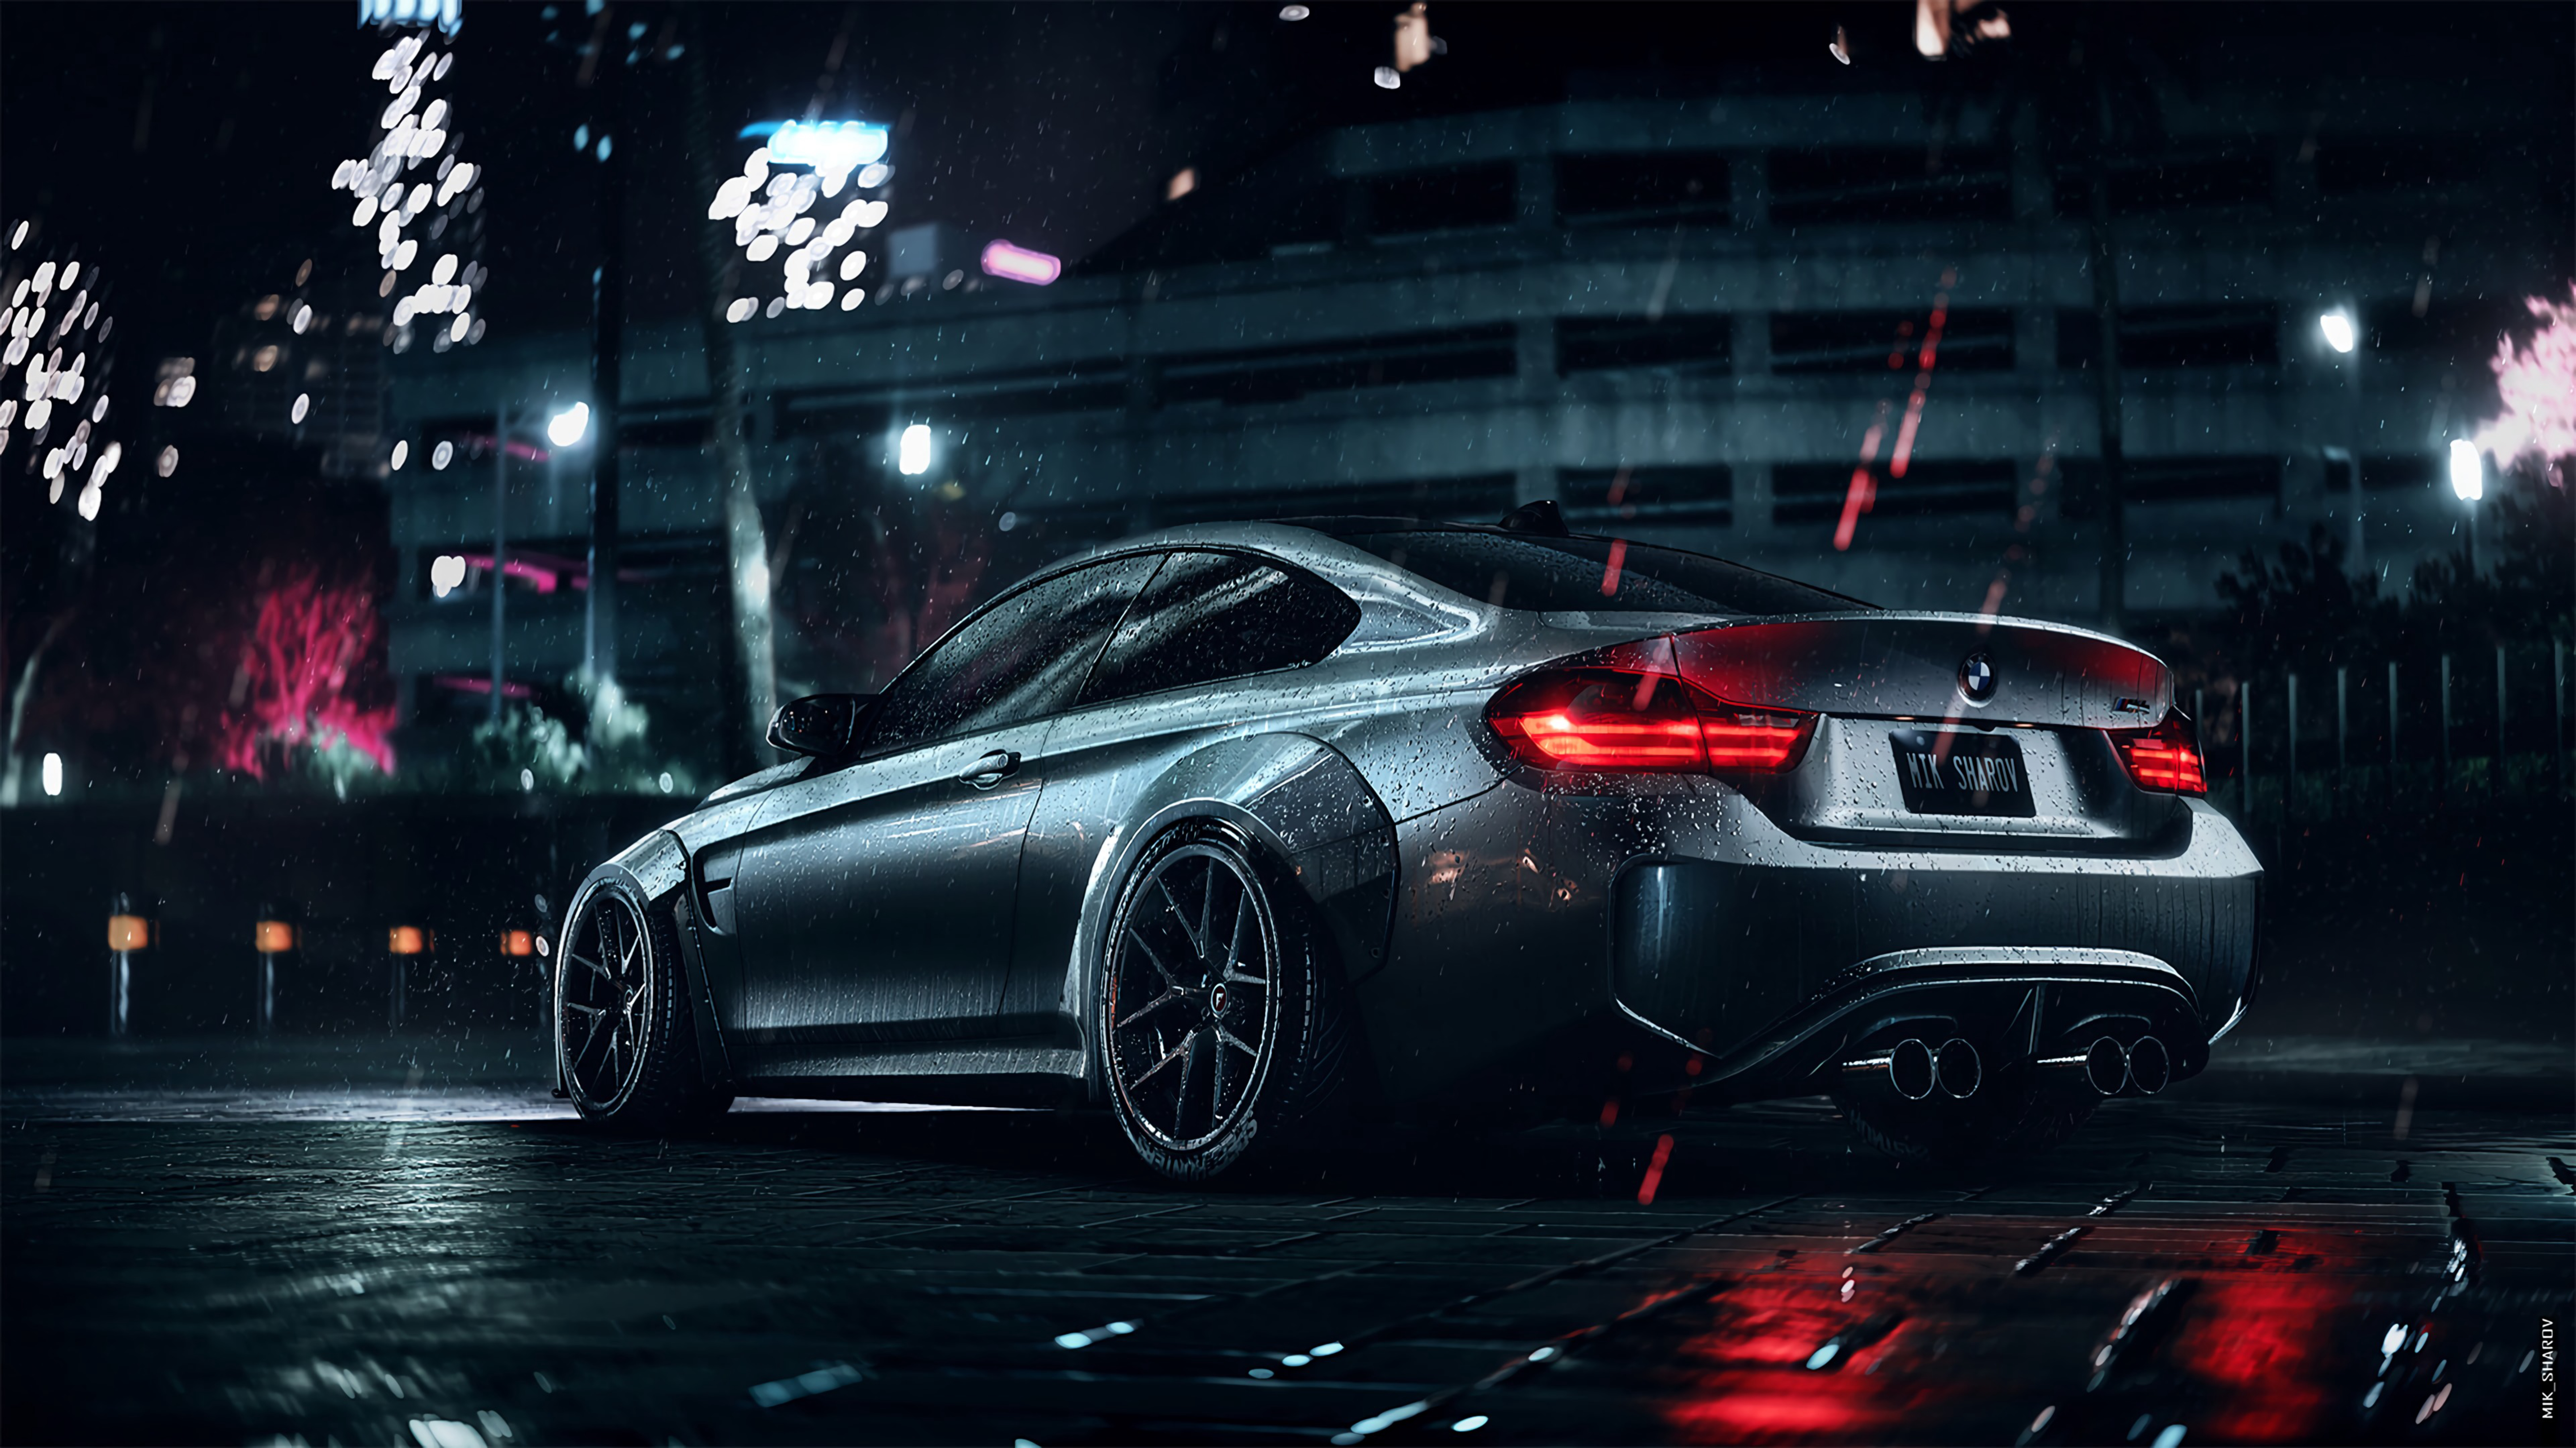 sports, car, cars, night, bmw, wet, machine, grey, metallic, coupe, compartment